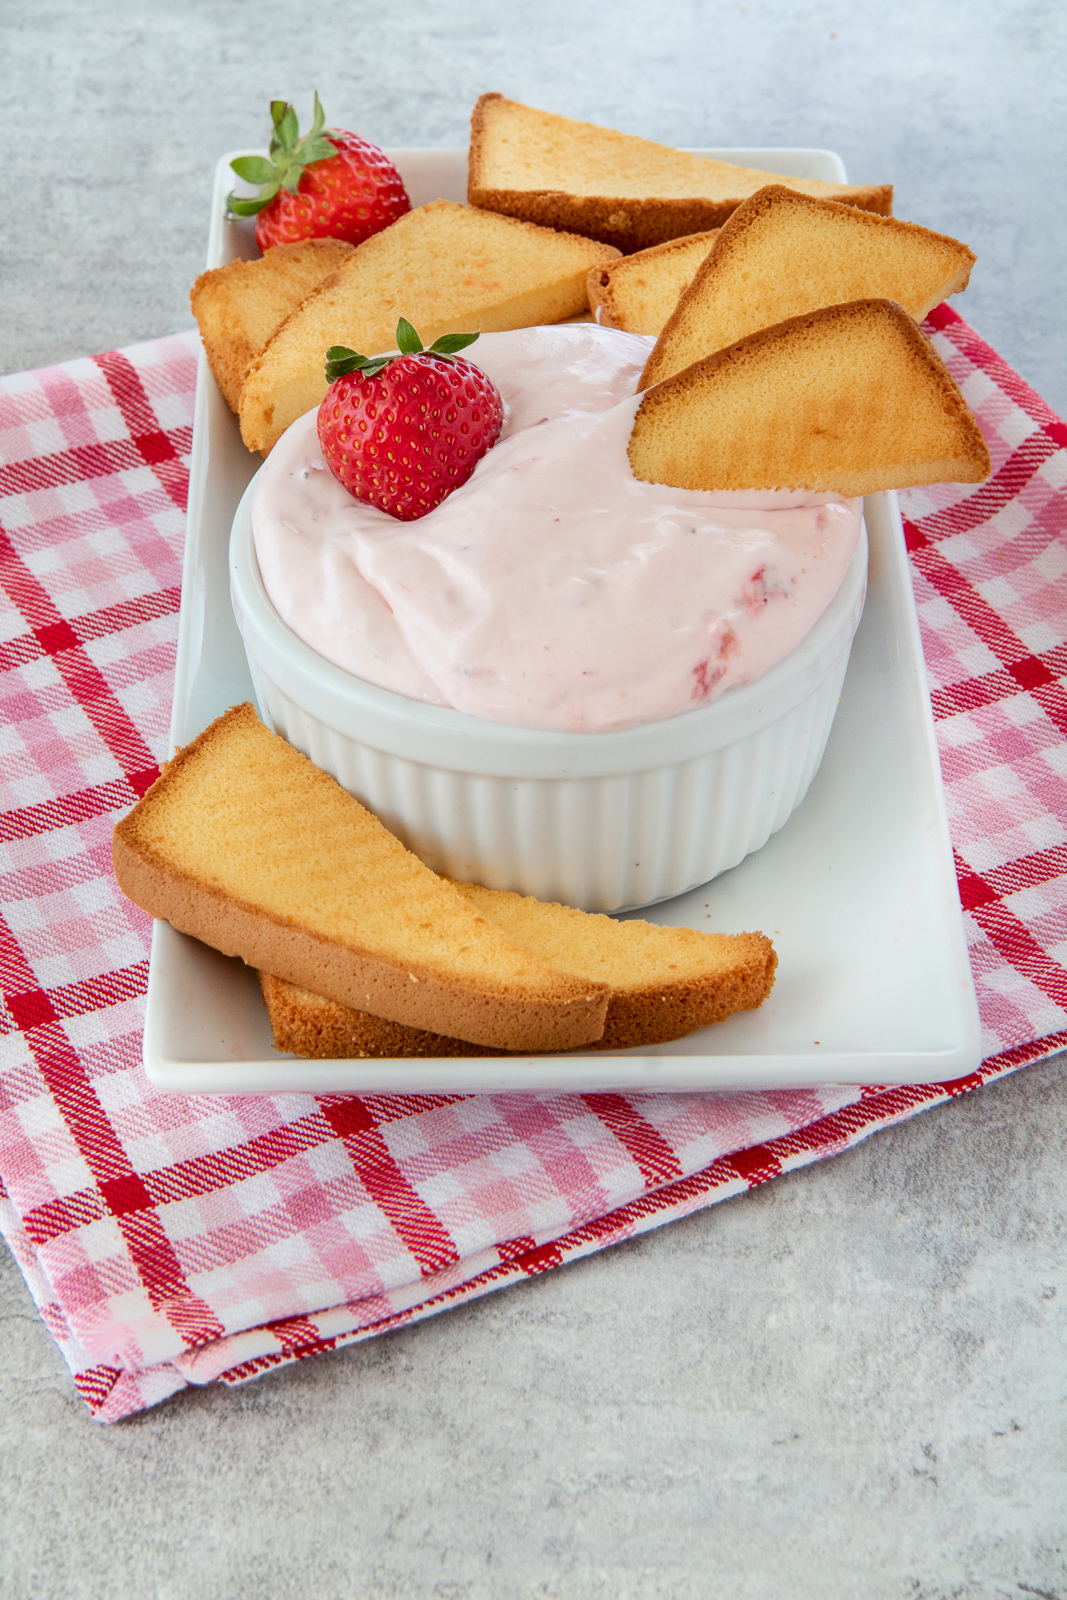 Looking for a new twist on strawberry shortcake? Try this fun strawberry chips and dip dessert recipe made with delicious poundcake chips.